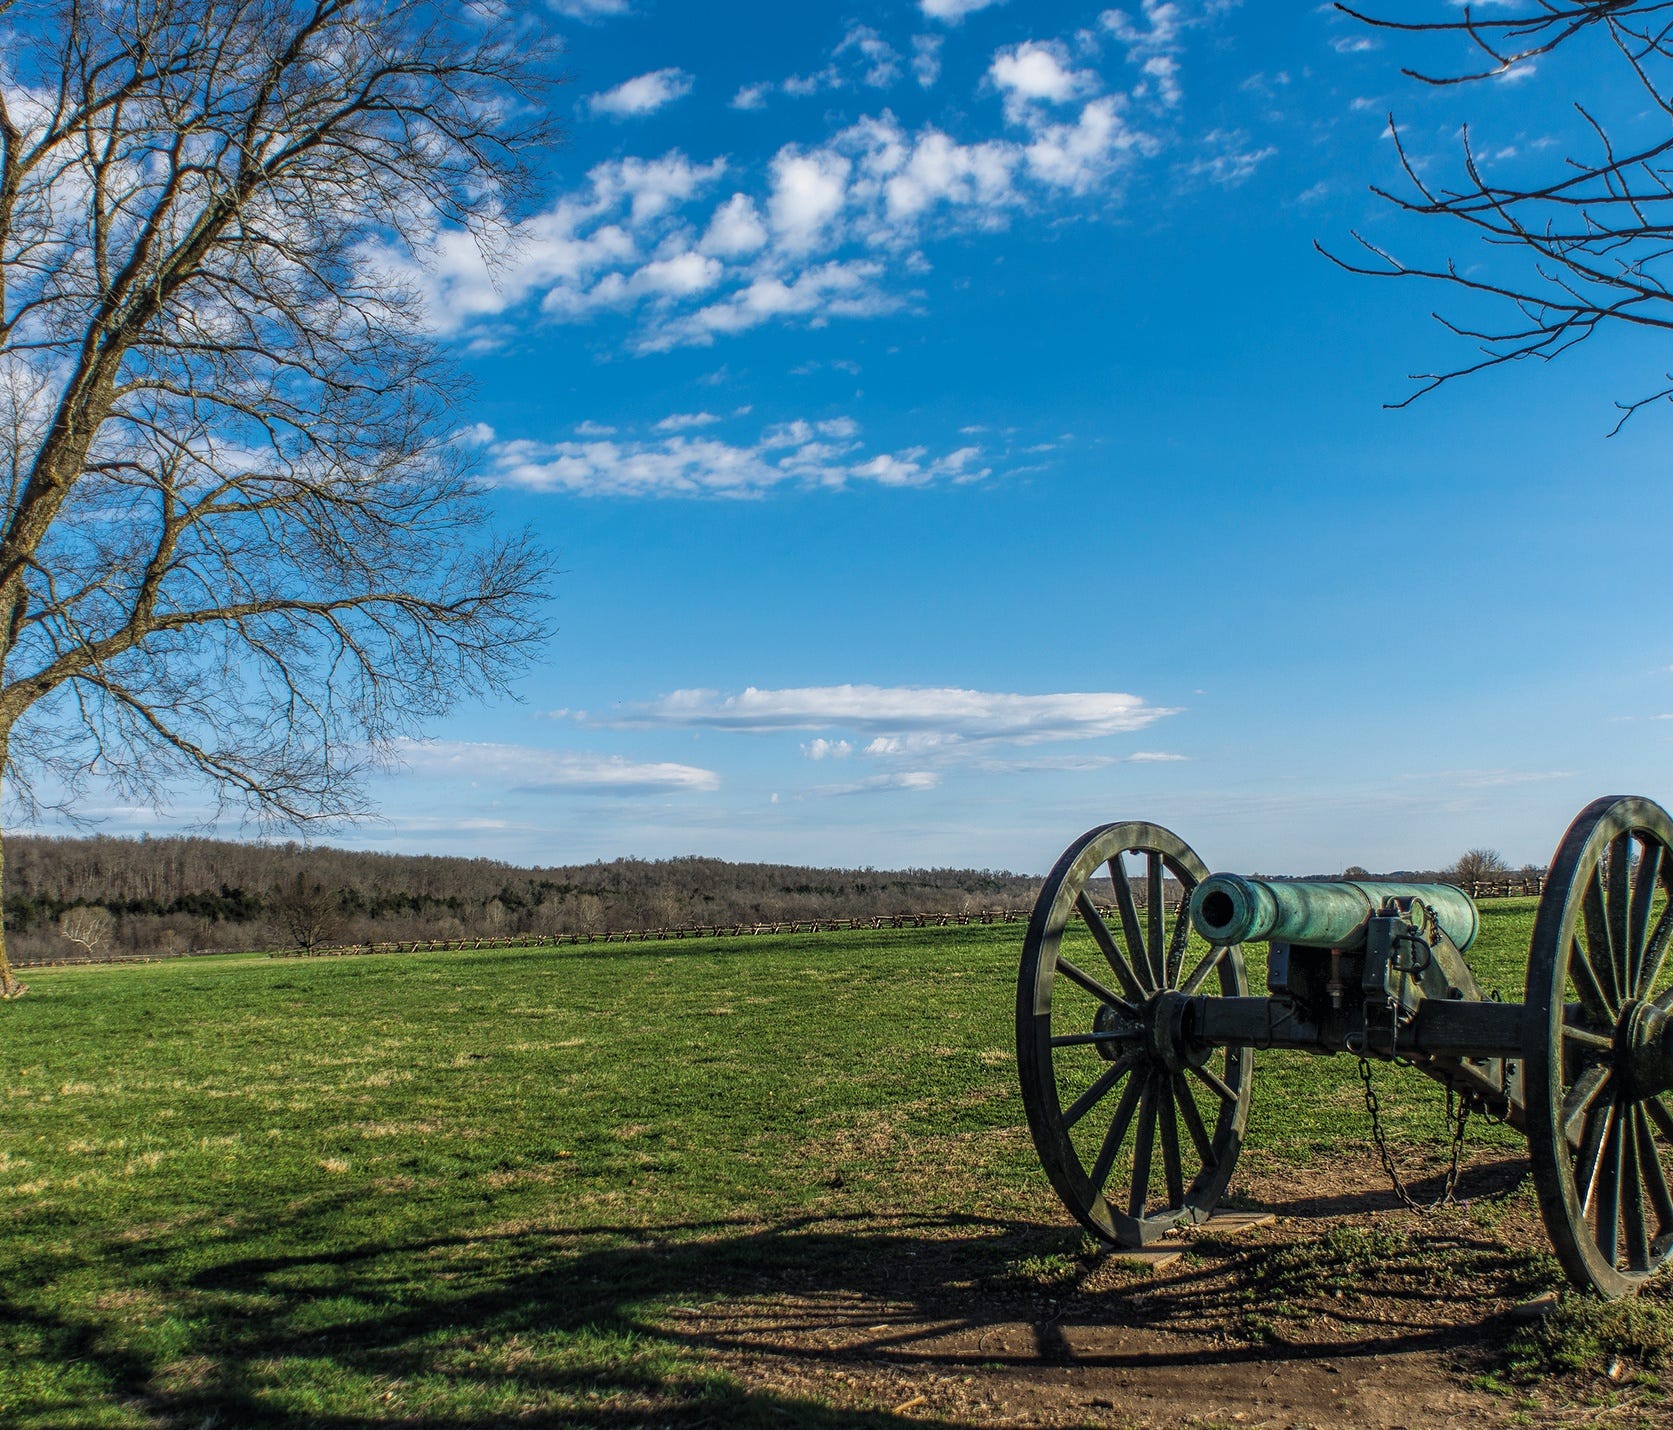 The first Civil War battle fought west of the Mississippi occurred at Wilson's Creek in Republic, Mo.